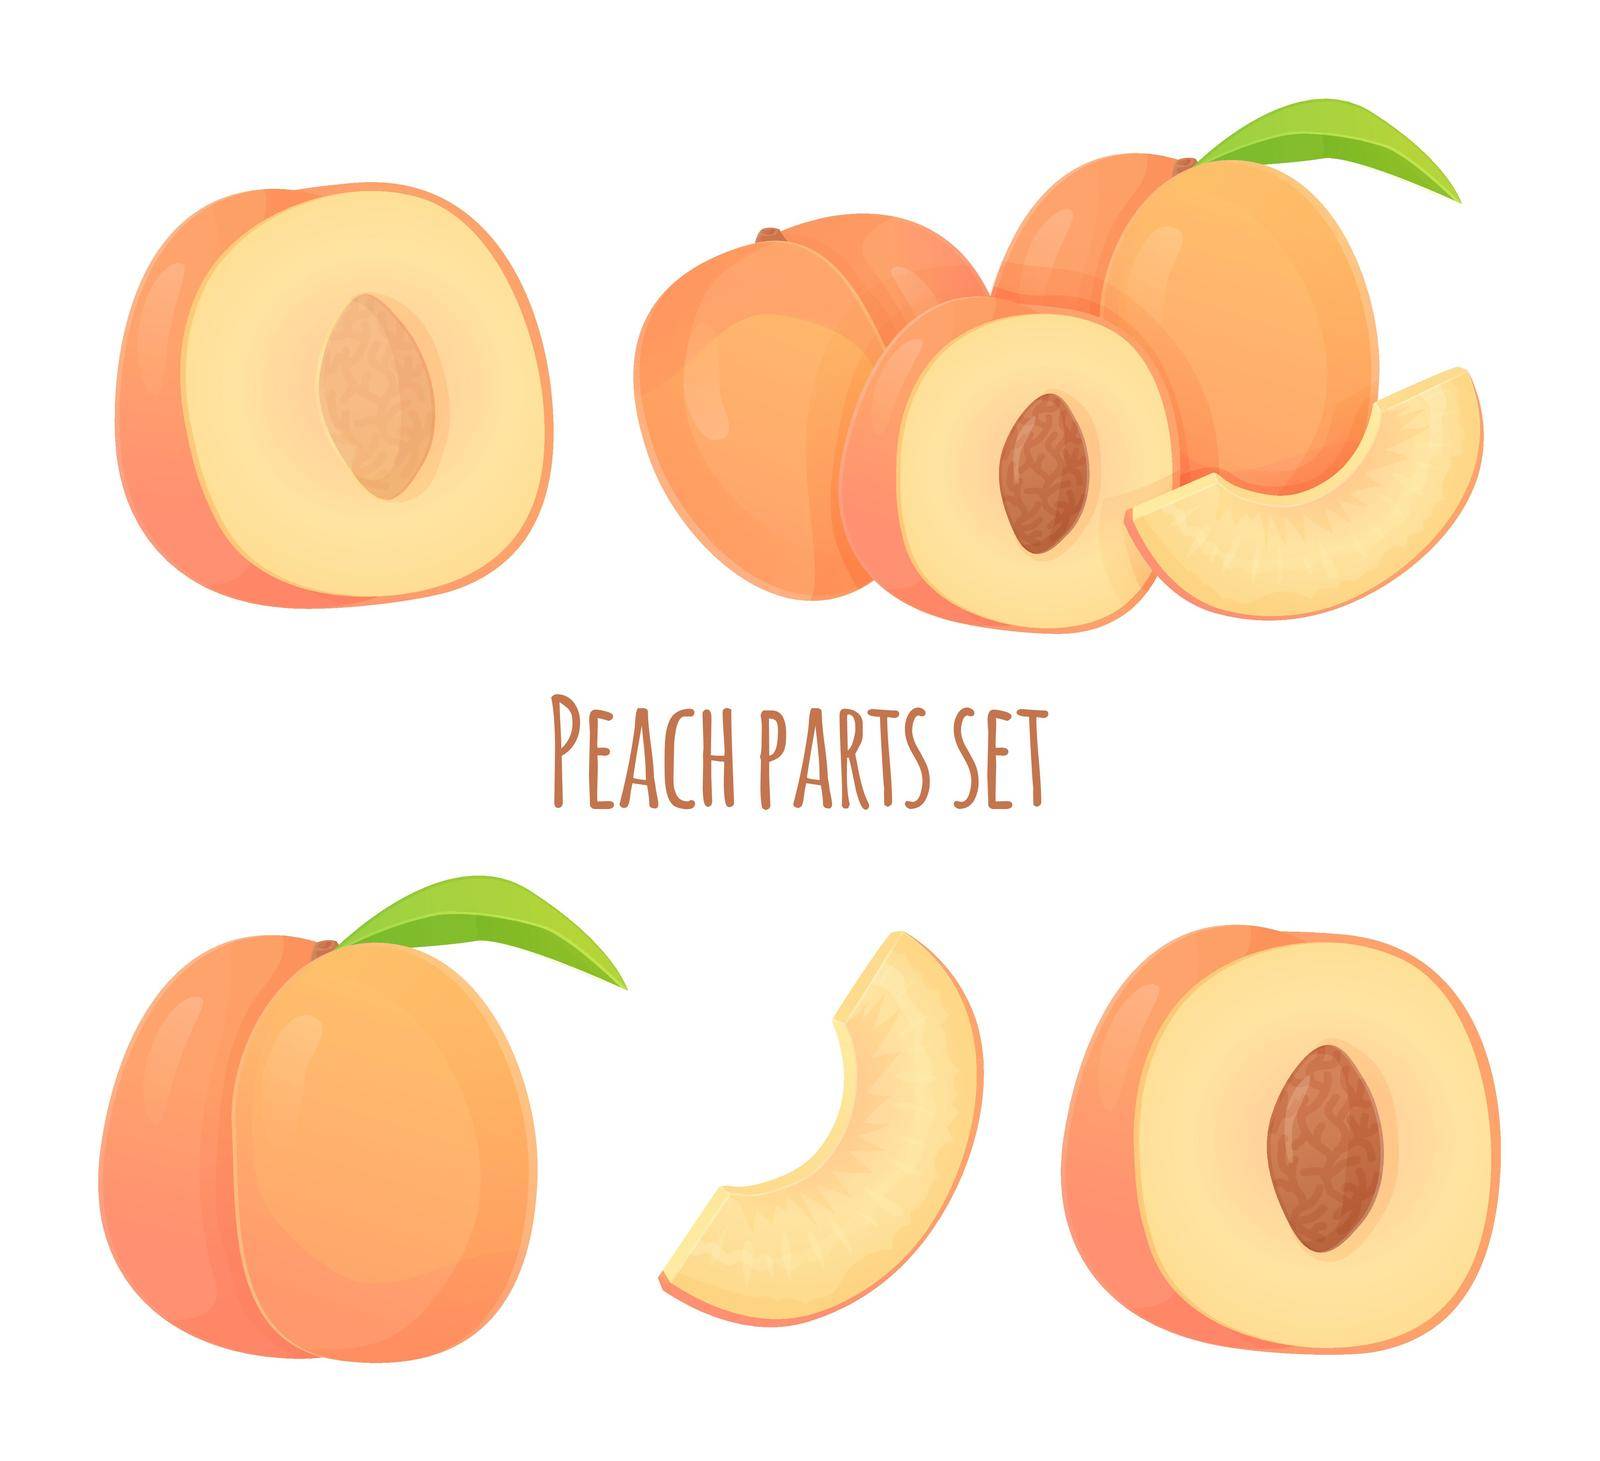 Set of peaches in different shapes, slice, half with seed and without , whole fruit. Can be used for healthy diet, harvest natural eco food concept. Stock vector illustration in realistic cartoon style.